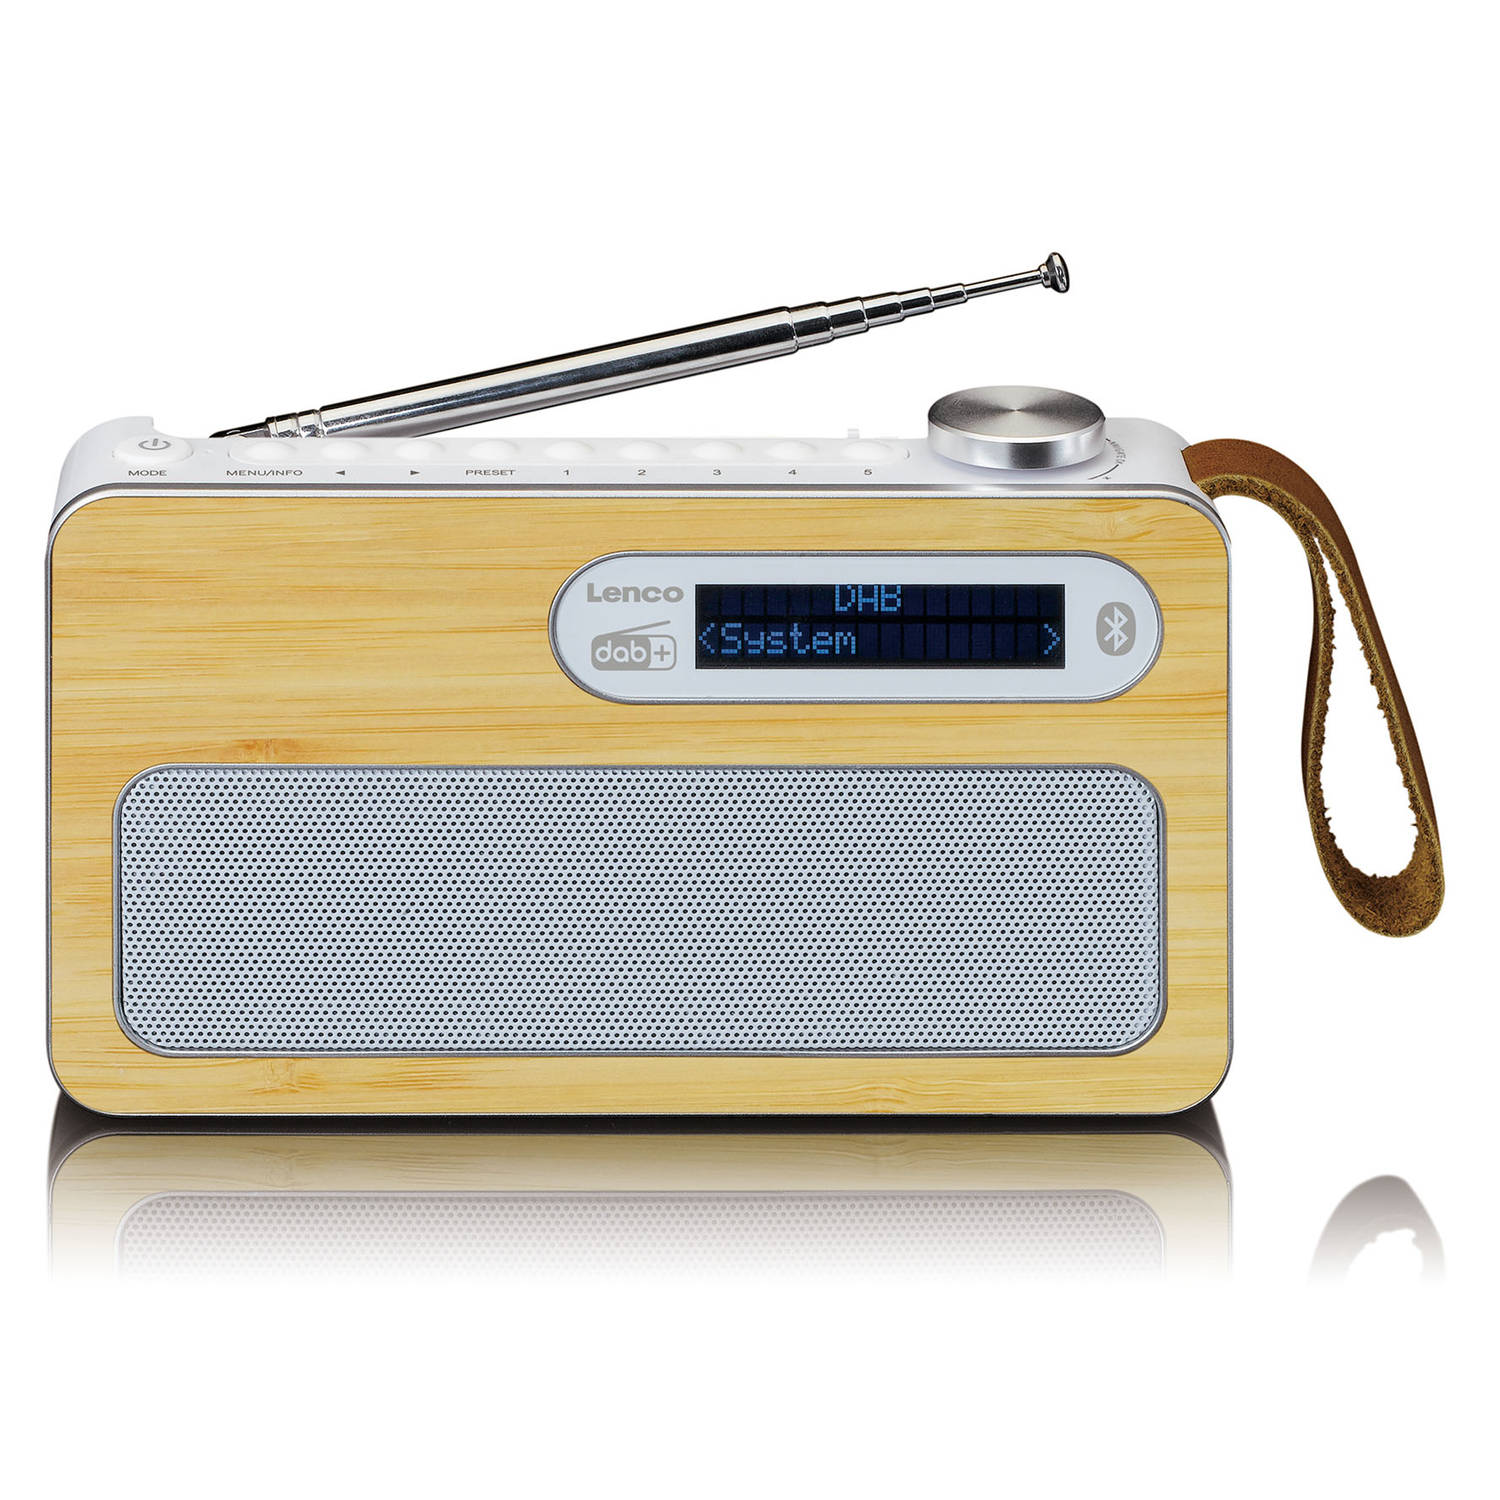 Lenco Pdr-040bamboo Wh Dab+-fm Radio Bluetooth- Bamboo Wit